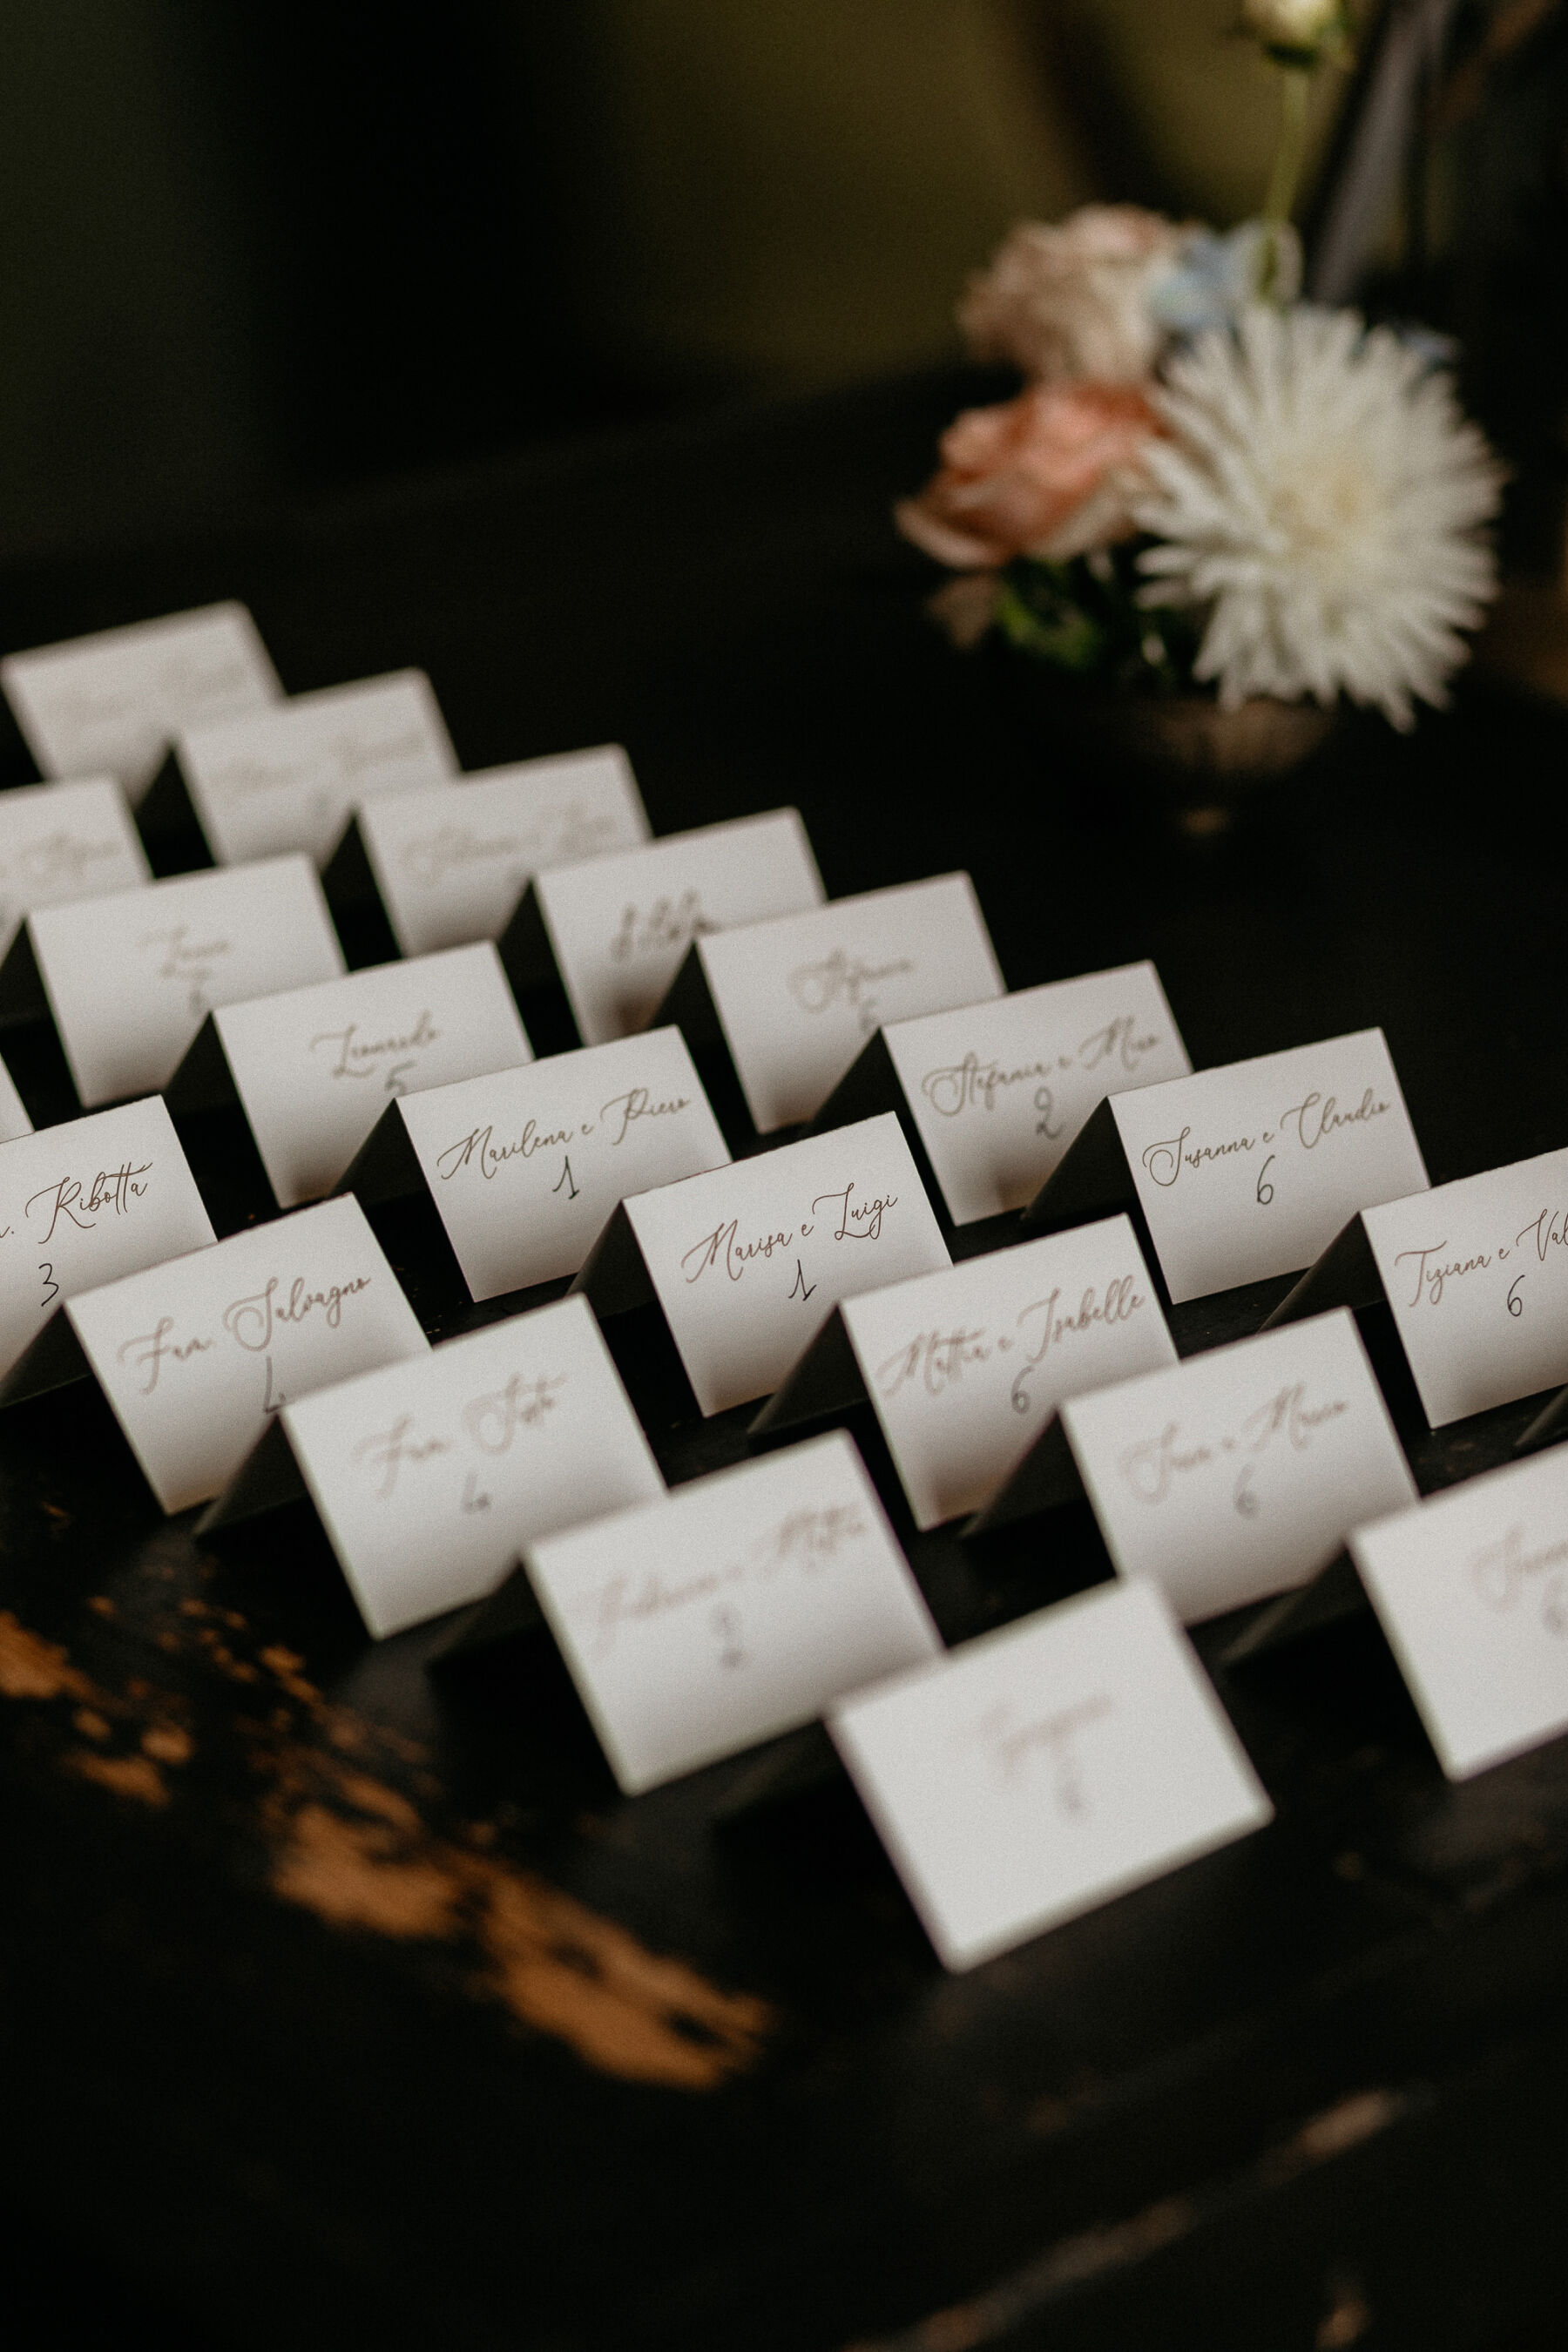 Handwritten wedding place cards lined up in a row.